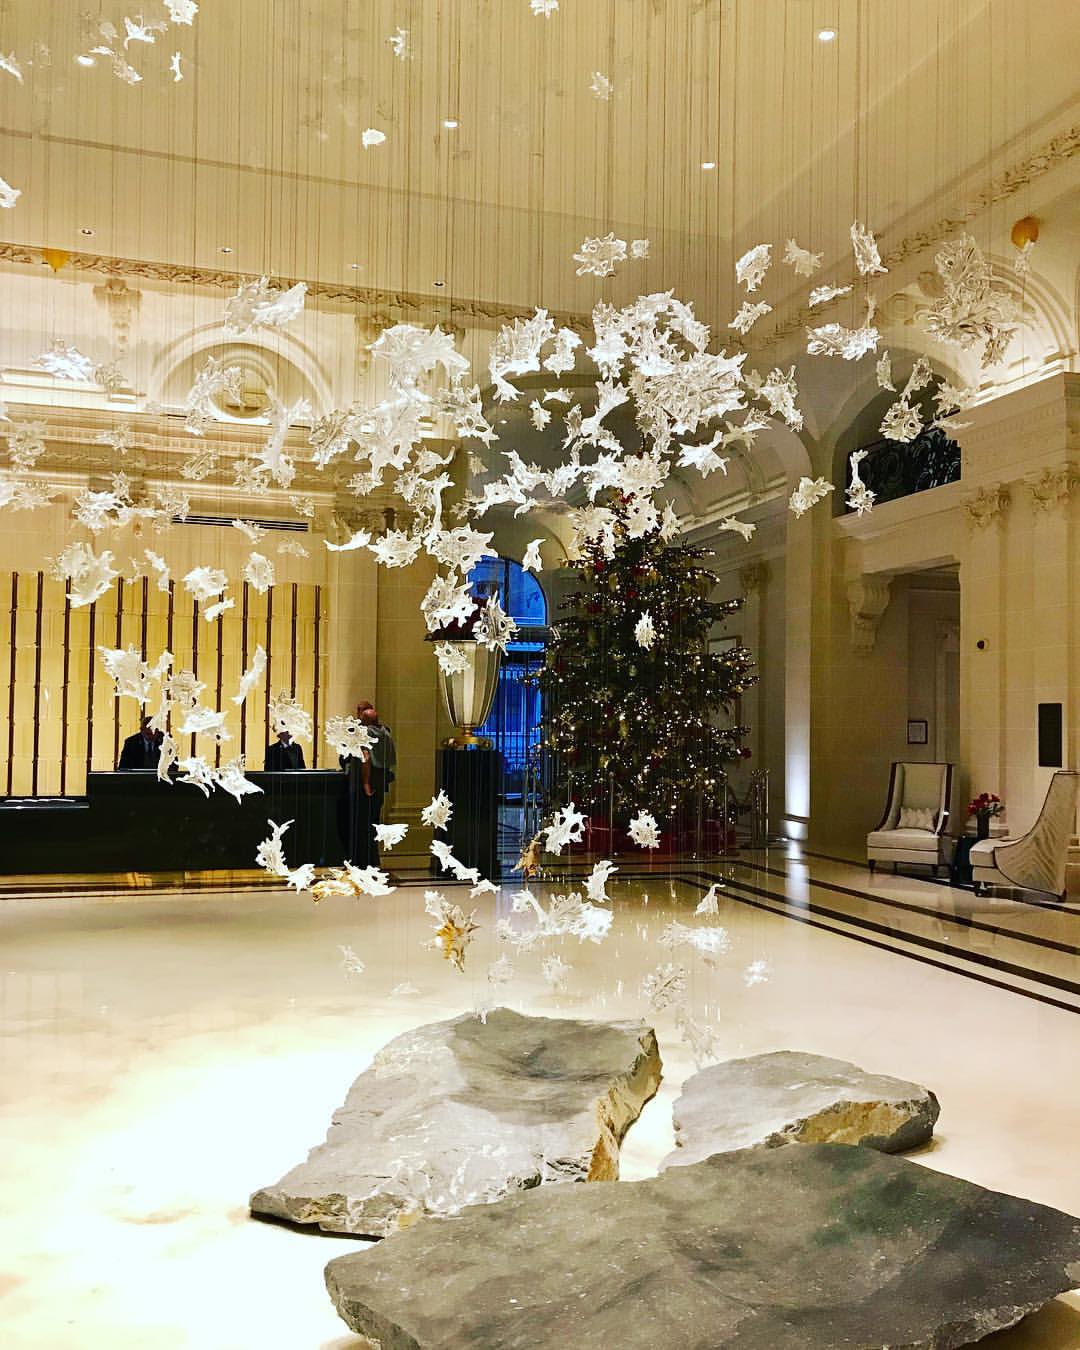 lolo chapters lolochapters profile deer accents table bourse michelin magical moment captured thepeninsulaparis peninsulahotels such wonderful paris holiday break piece nesting